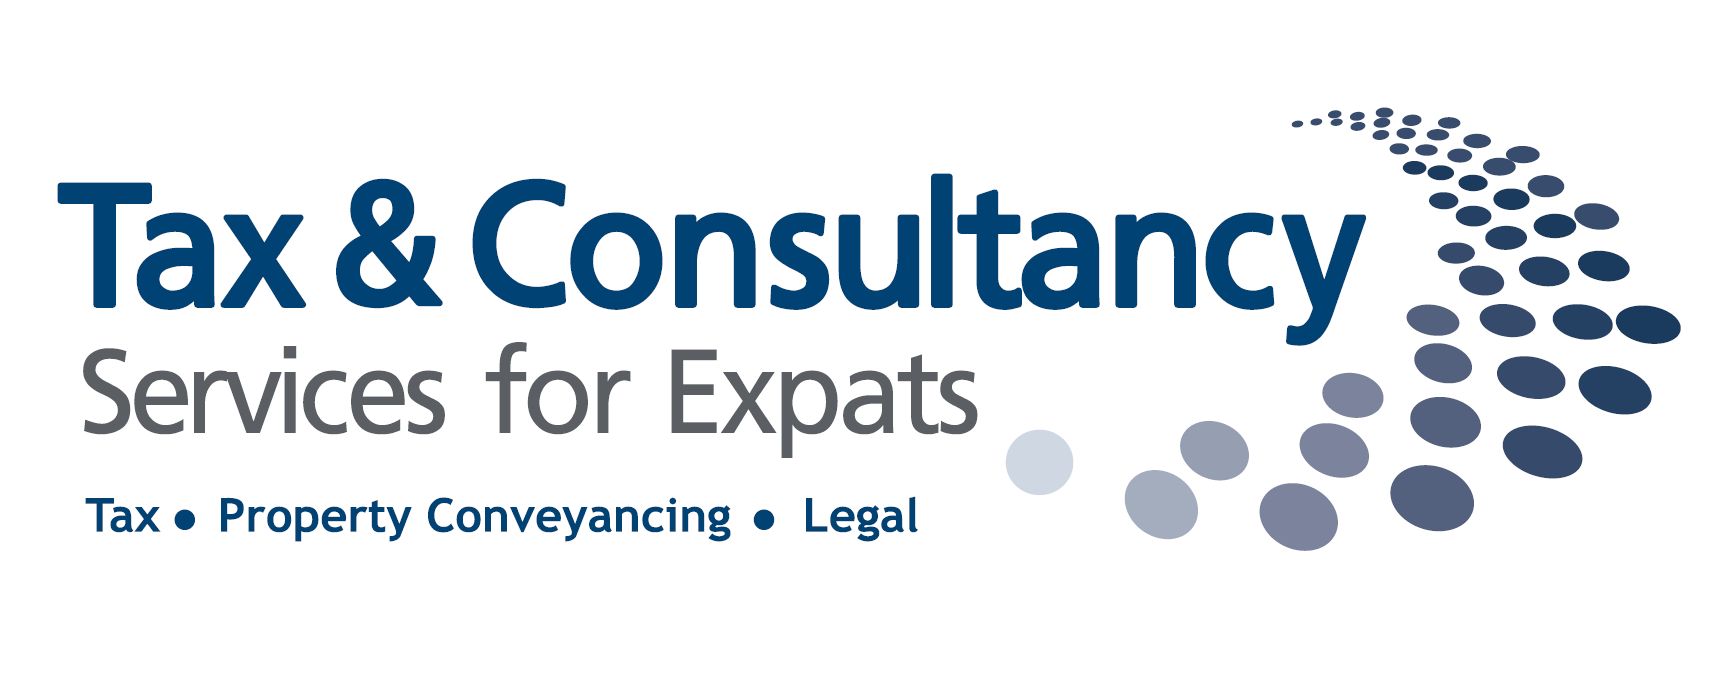 Tax Property Conveyancing Services for Expats